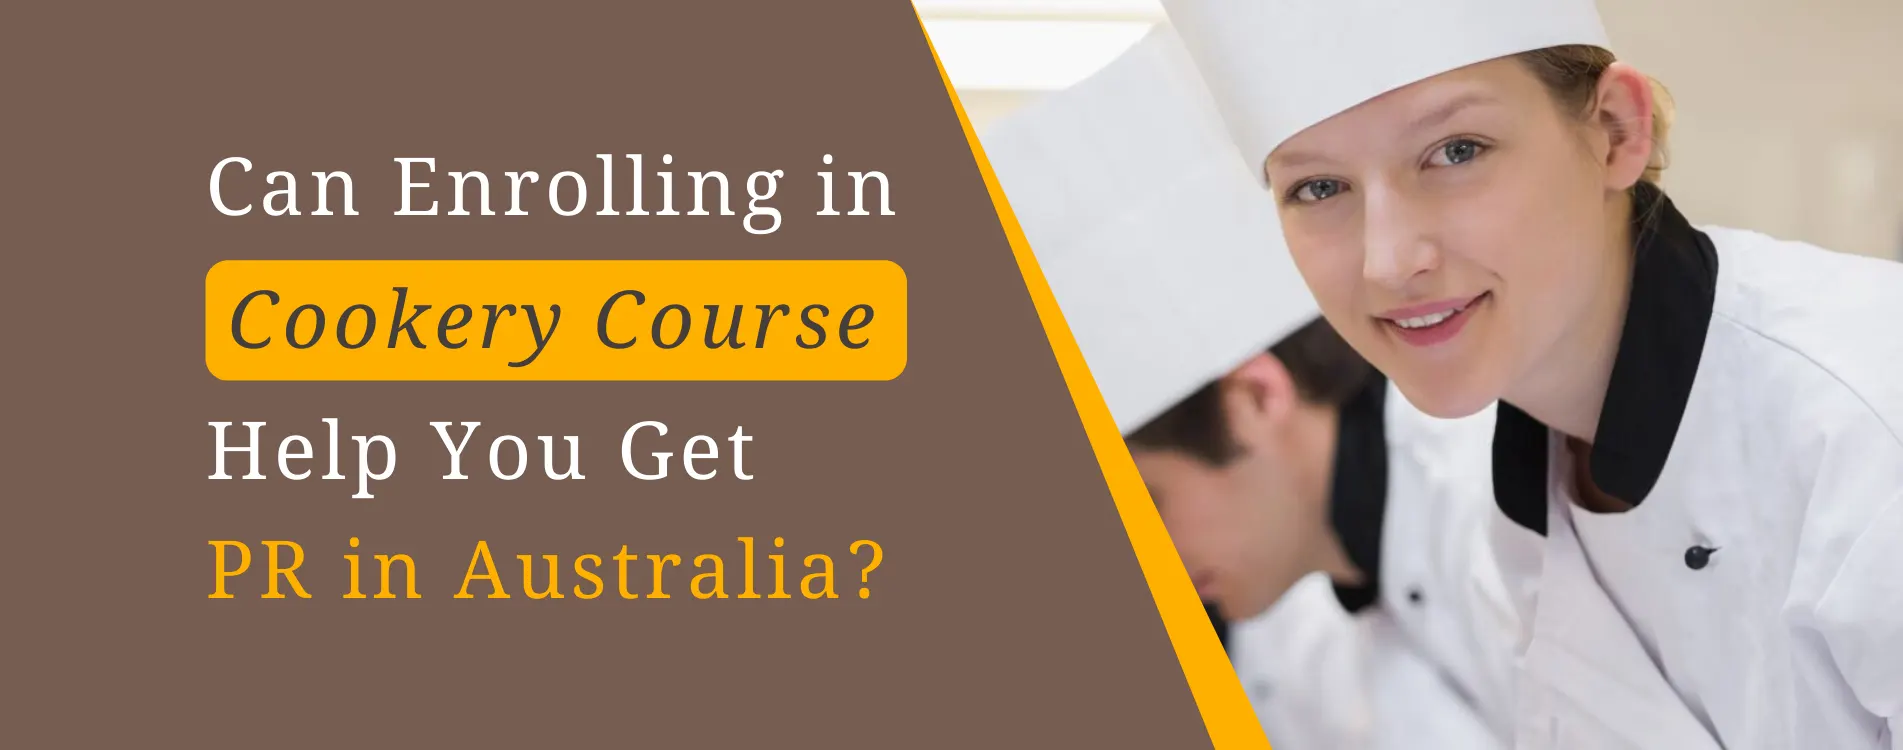 Can Enrolling in a Cookery Course Help You Get PR in Australia?